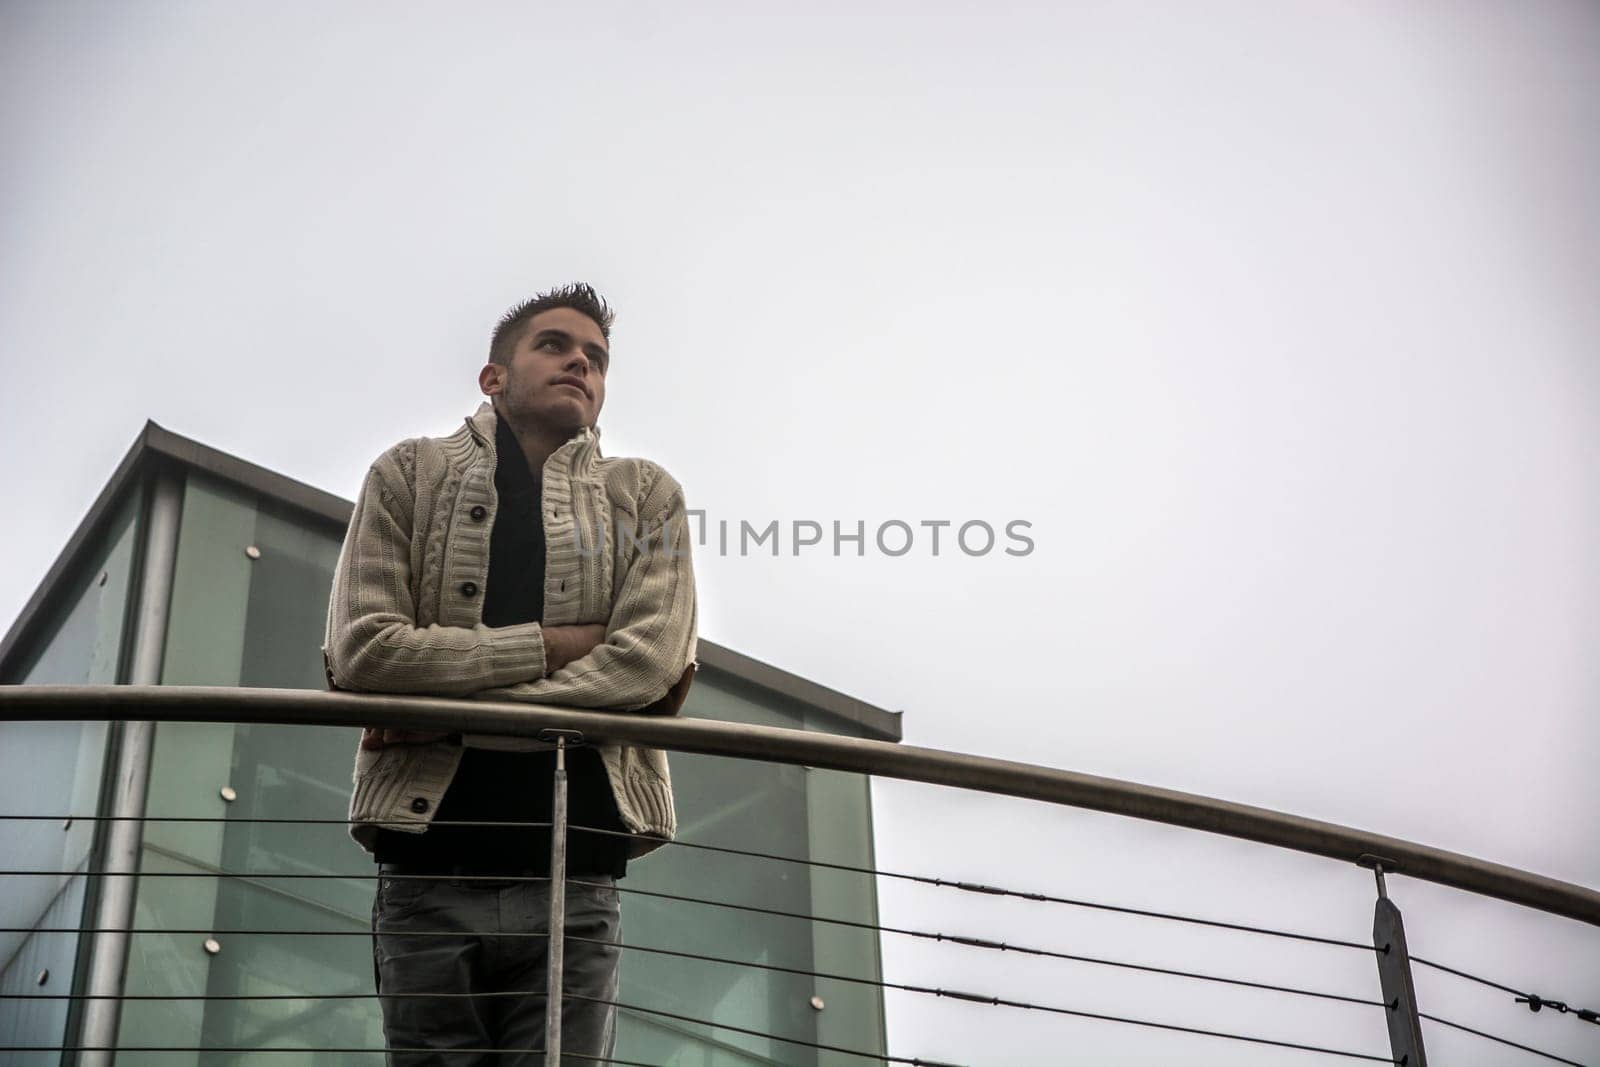 A man standing on a balcony with his arms crossed. Photo of a confident man standing on a balcony with crossed arms in a cloudy day in winter, seen from below